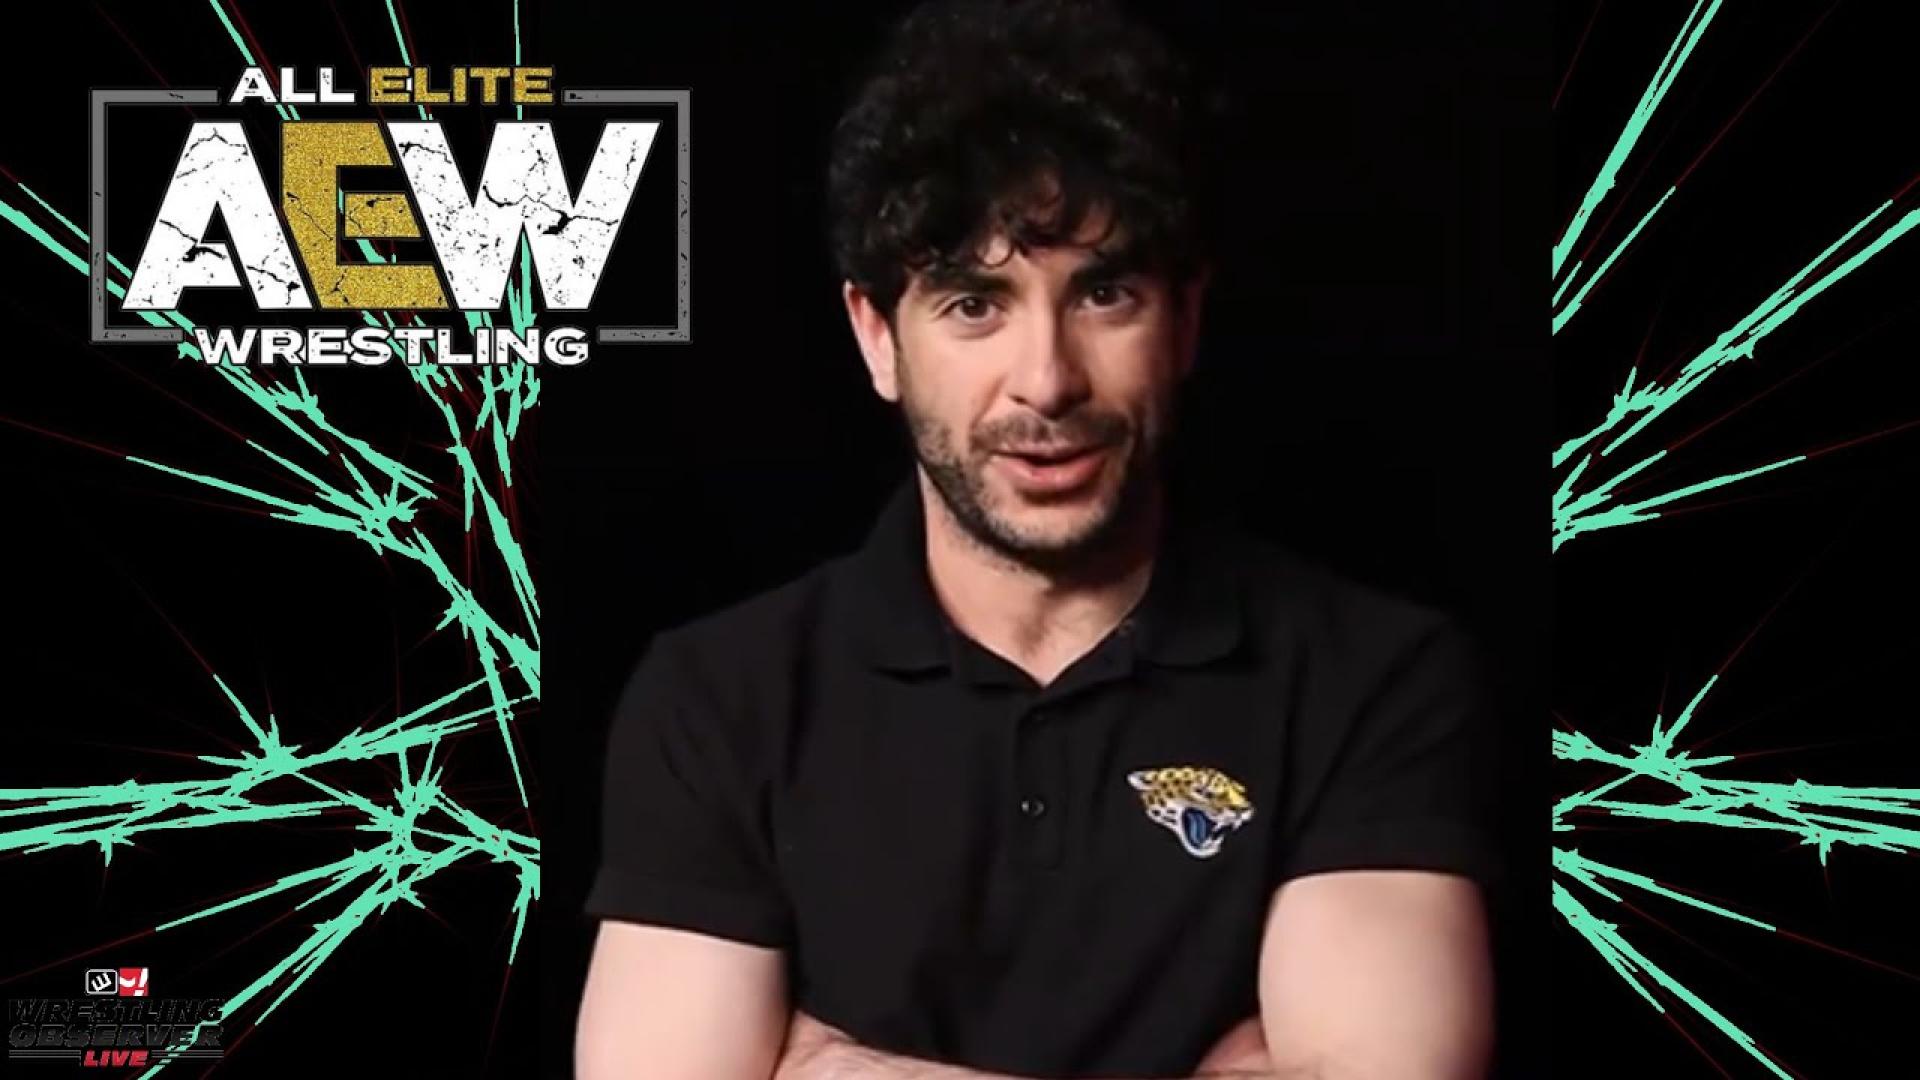 Tony Khan Aims to Make AEW Collision an Annual Event in the Super Bowl Host City